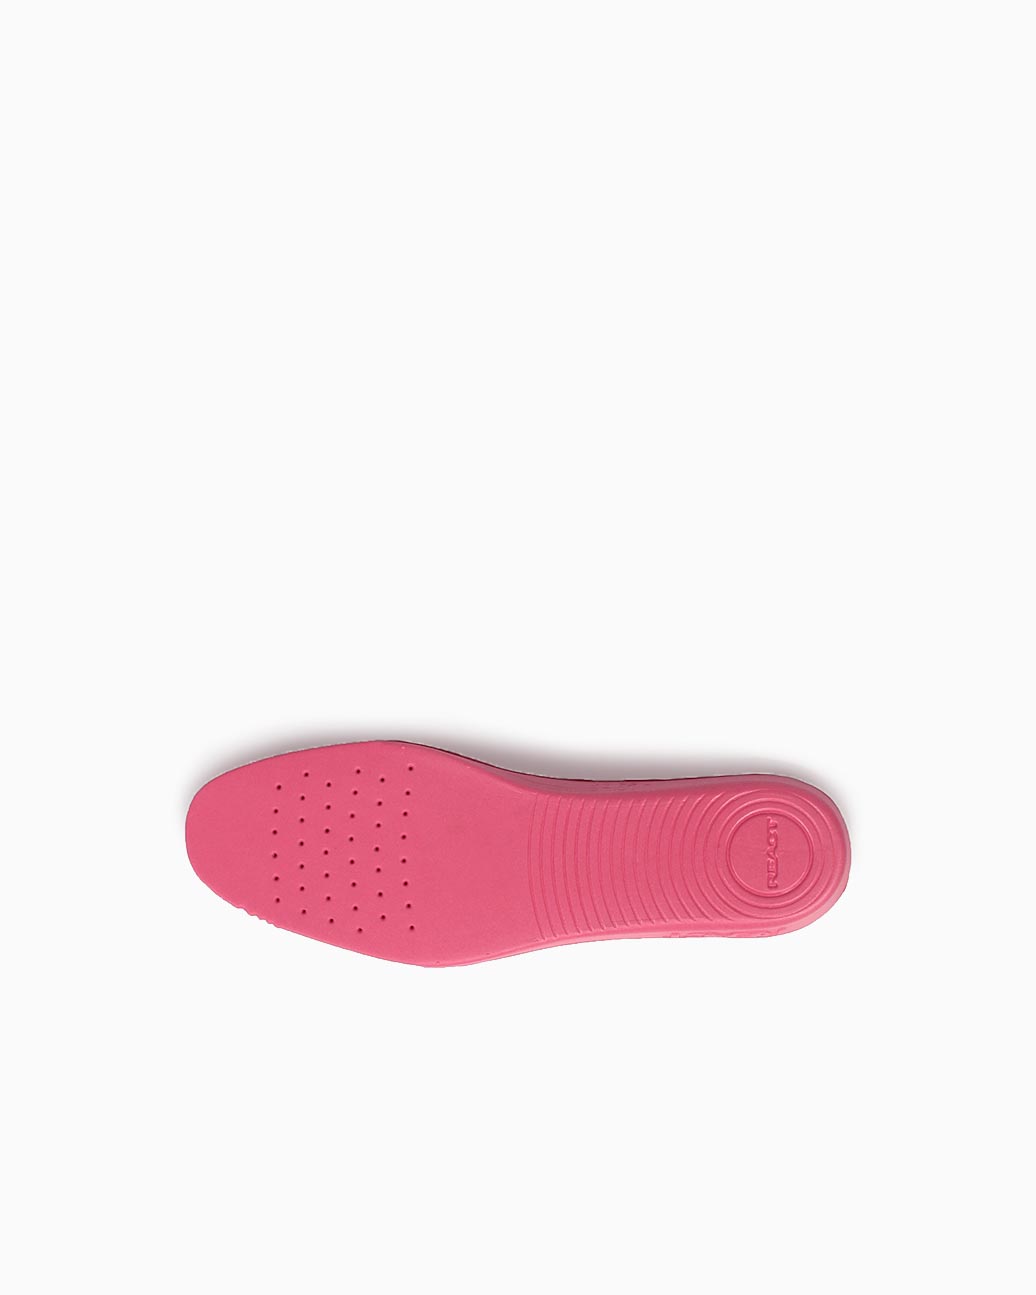 REACT CUP INSOLE